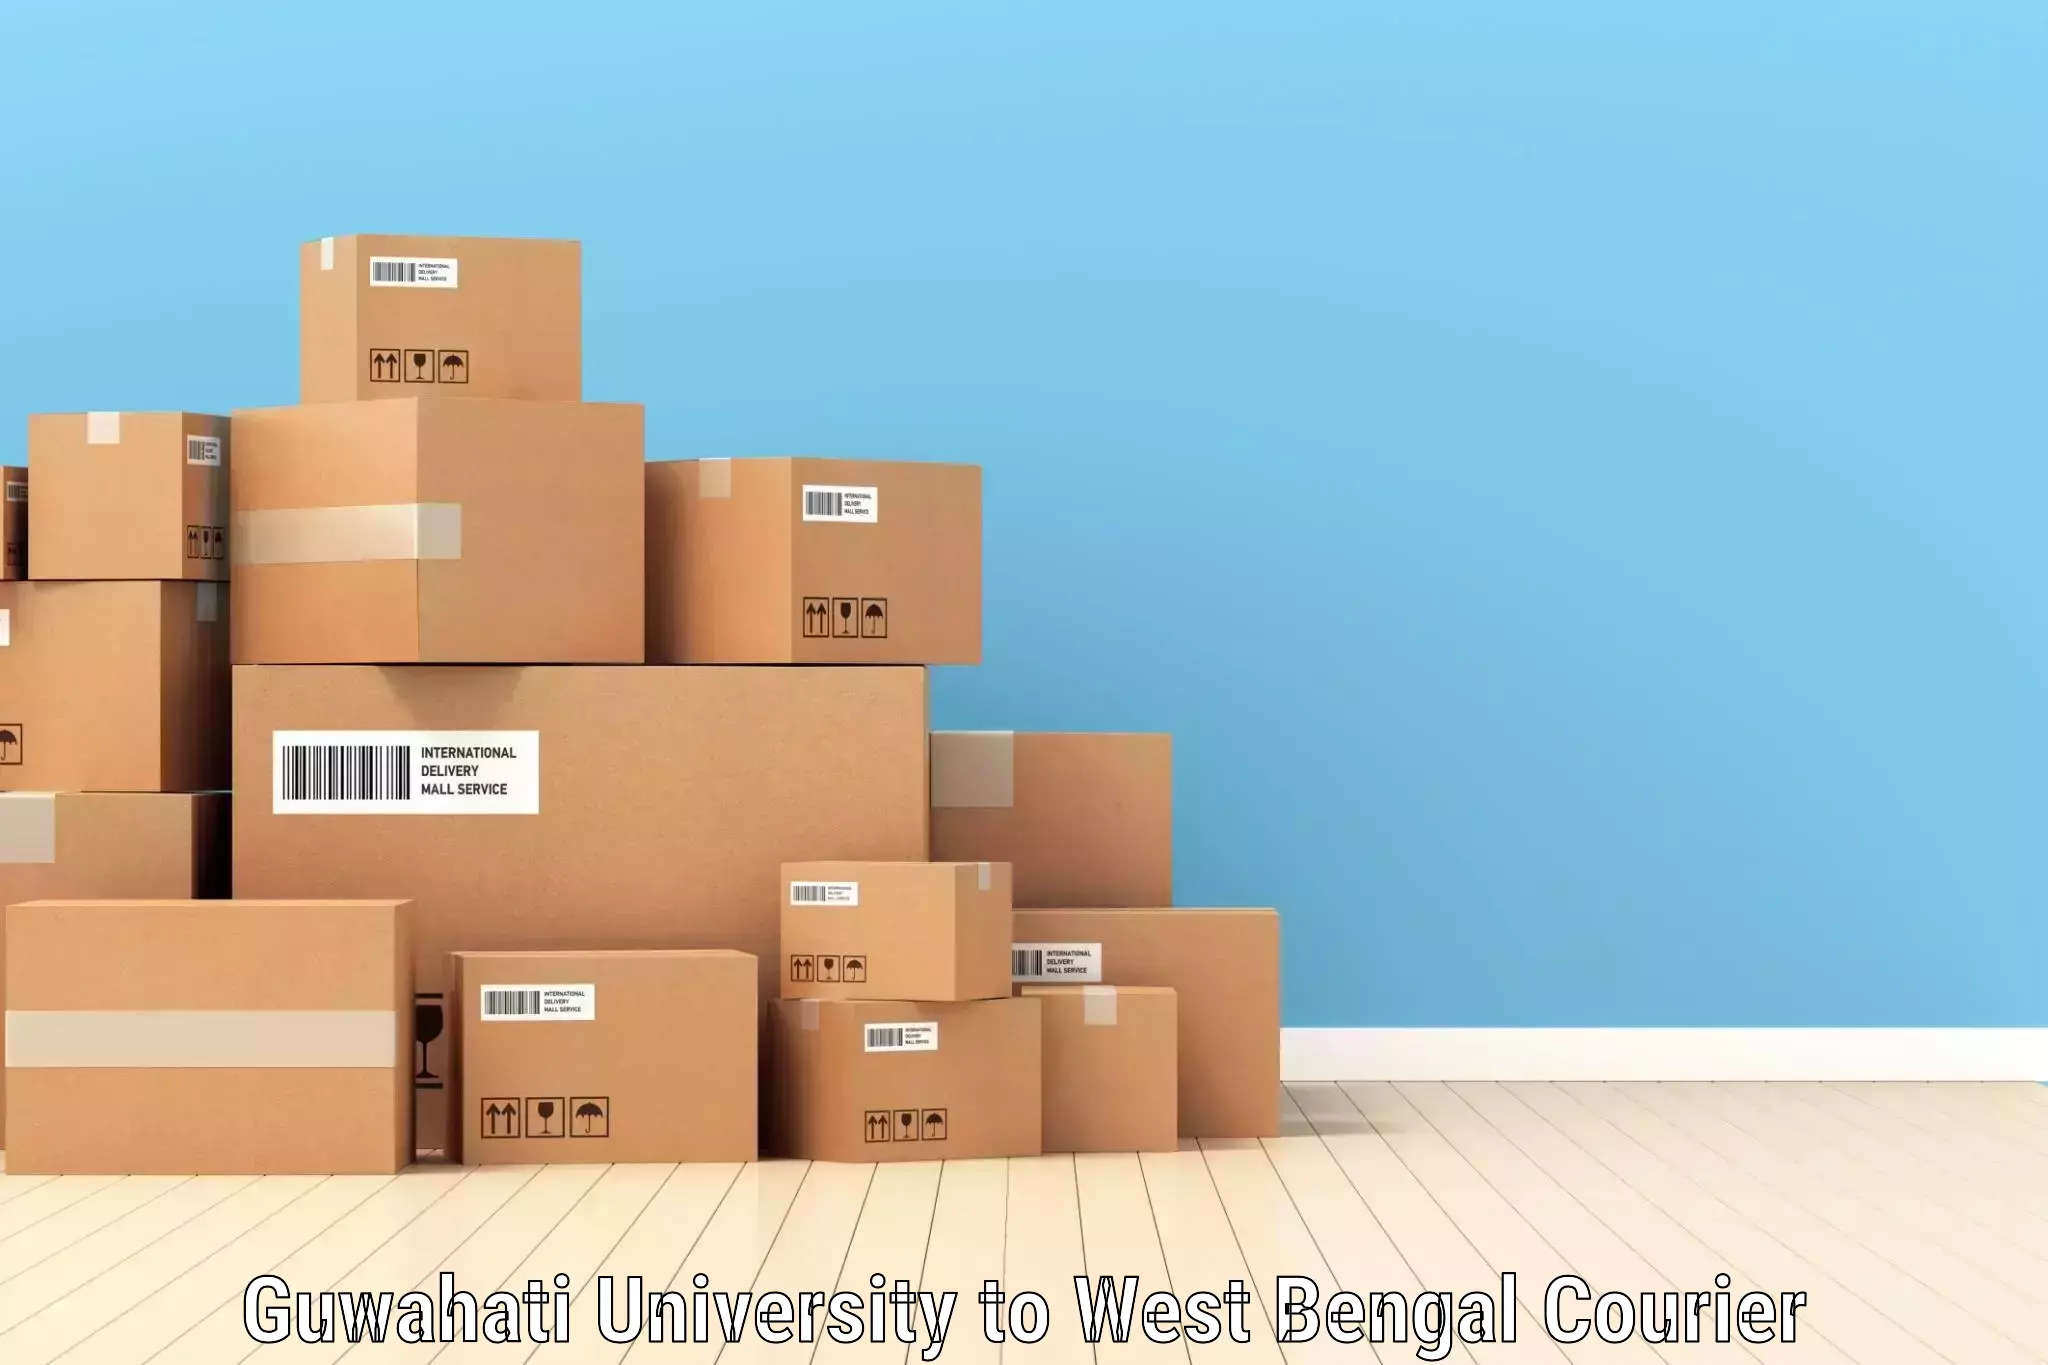 Large package courier Guwahati University to Chhatna